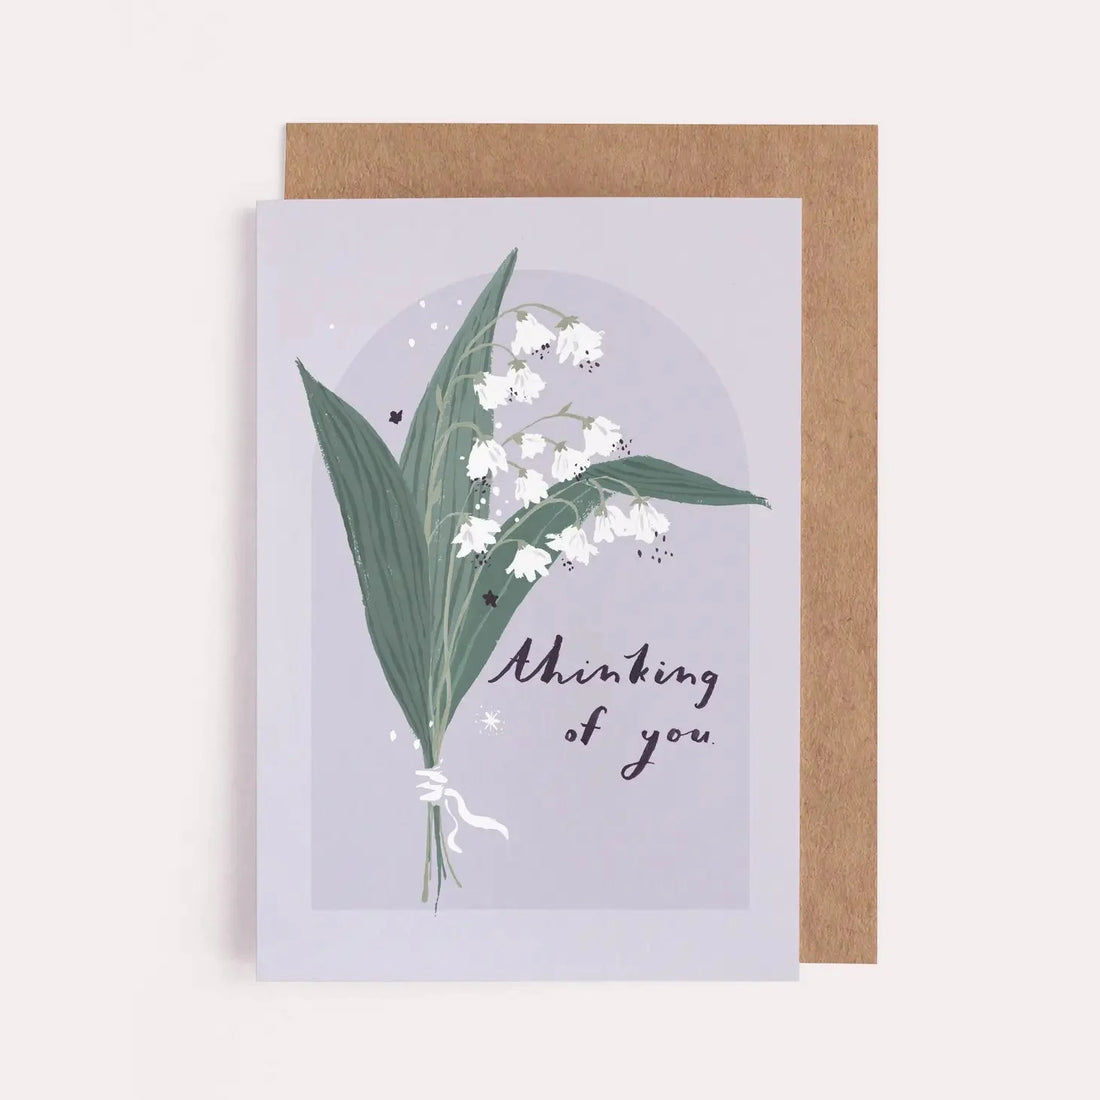 Thinking of You Flowers Card | Thinking of You Cards Cards Sister Paper Co.